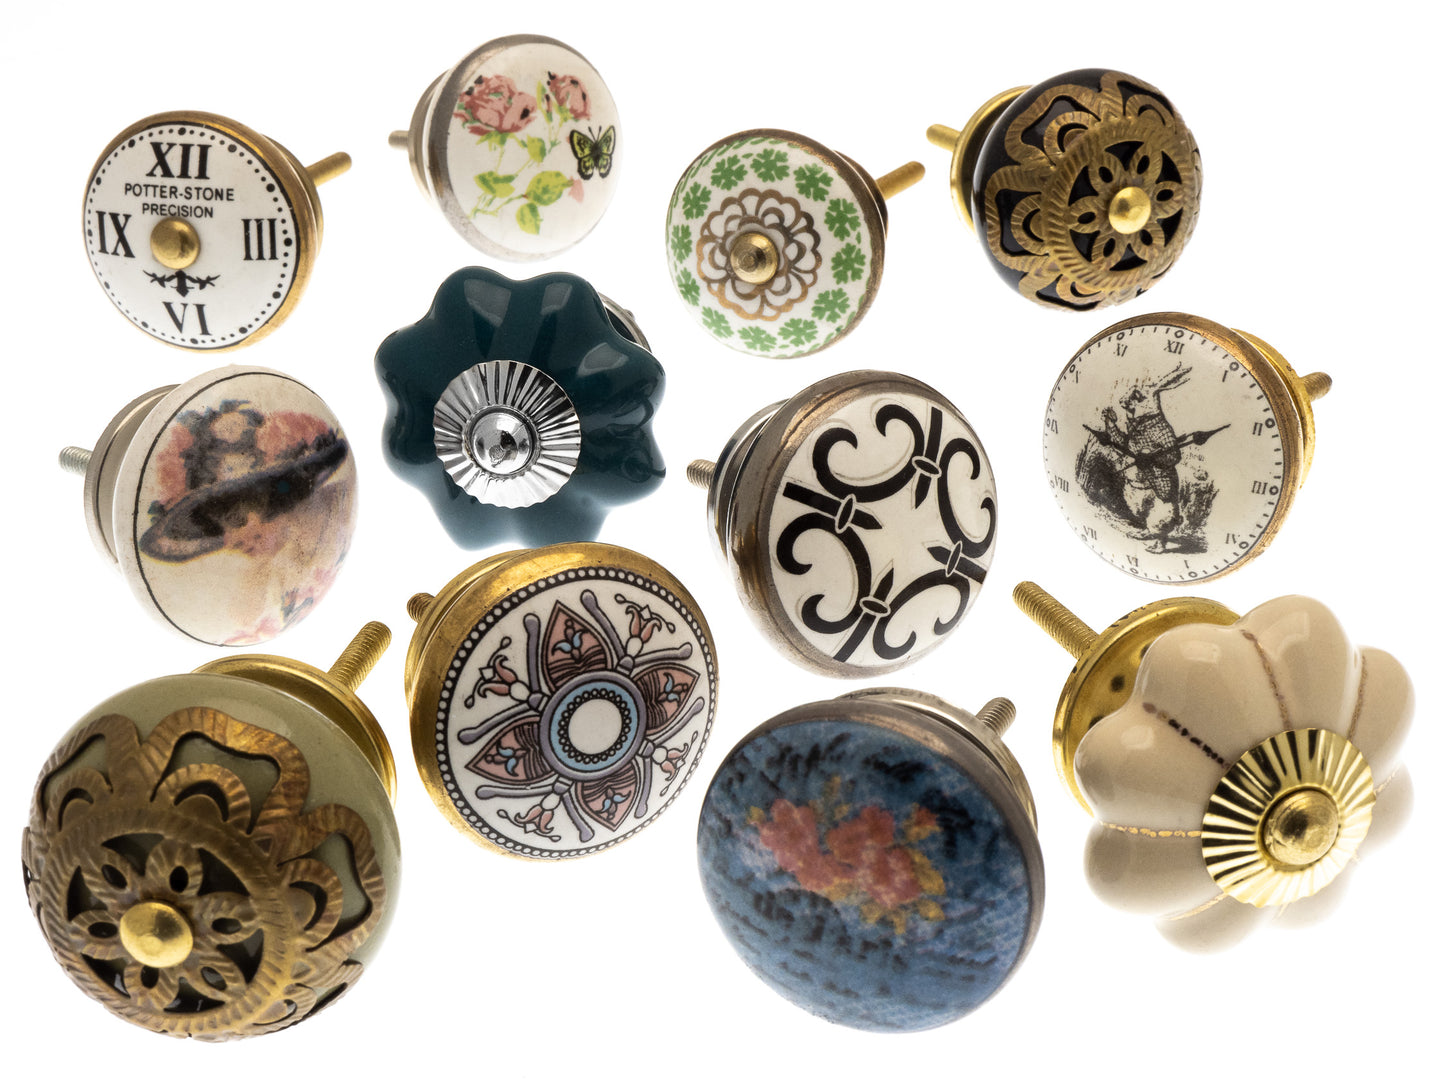 Ceramic Door Knobs in Vintage Style  Mosaic and Patterned Designs Set of 12